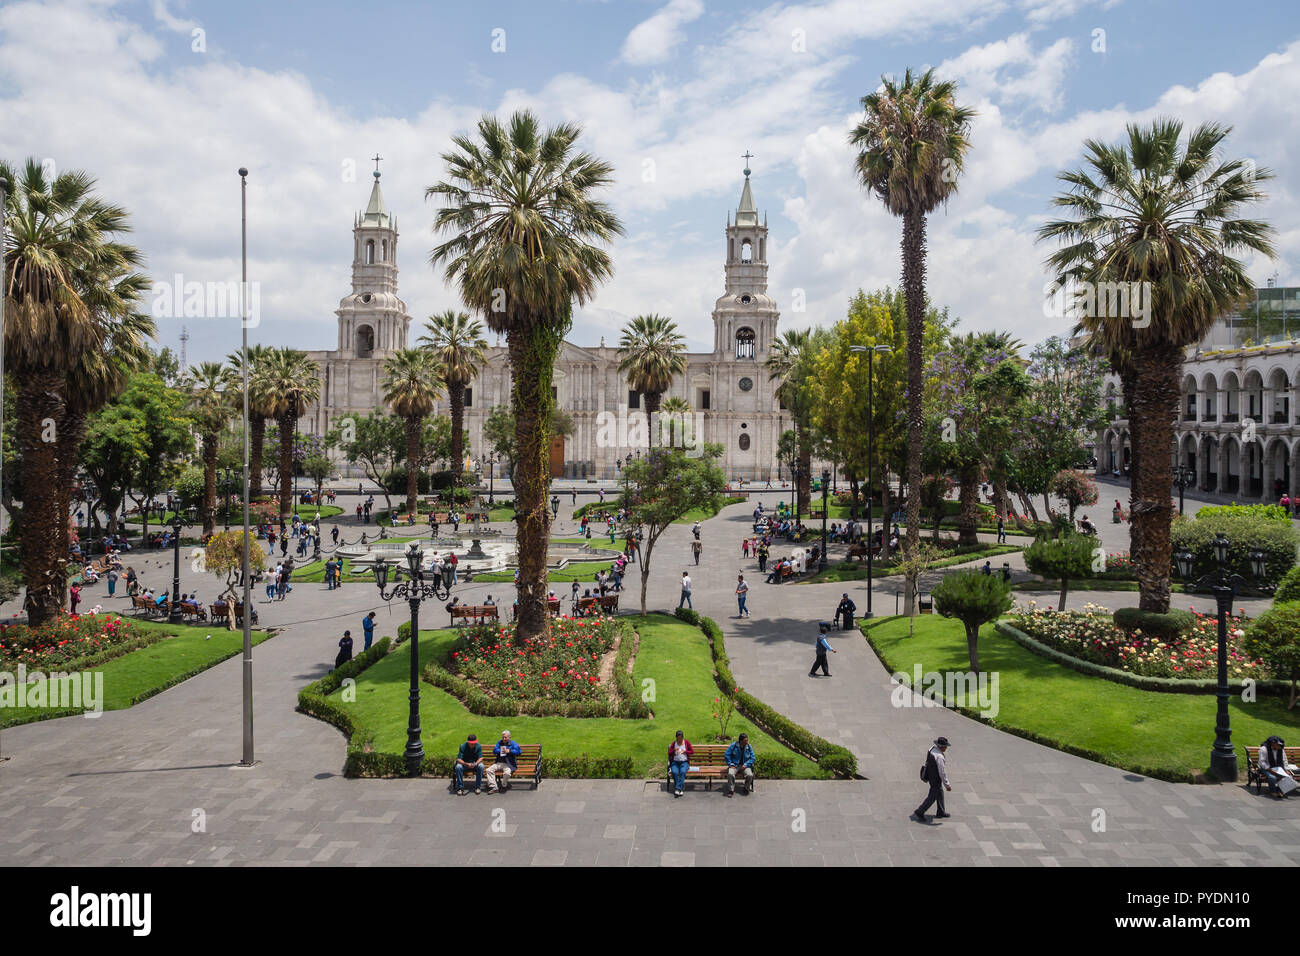 Arequipa city main square and cathedral. Palm and people relaxing and walking Stock Photo